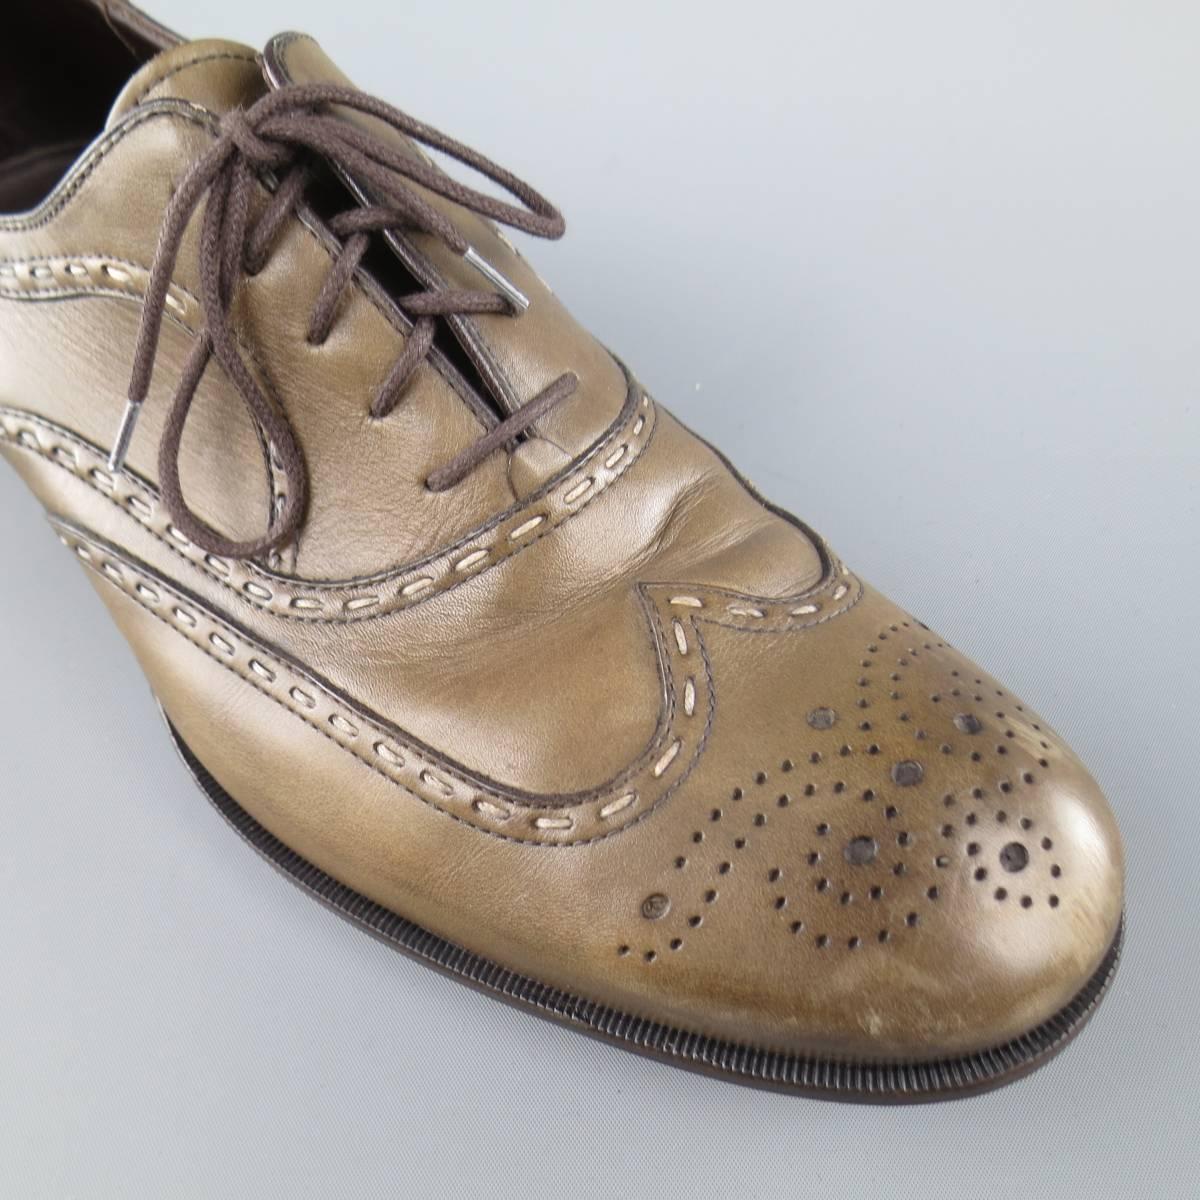 BOTTEGA VENETA lace ups in a washed olive leather featuring a wingtip toe, top stitching, and brogue details throughout. Wear throughout leather. Made in Italy.
 
Fair Pre-Owned Condition.
Marked: IT 42.5
 
Outsole: 11.75 x 4 in.